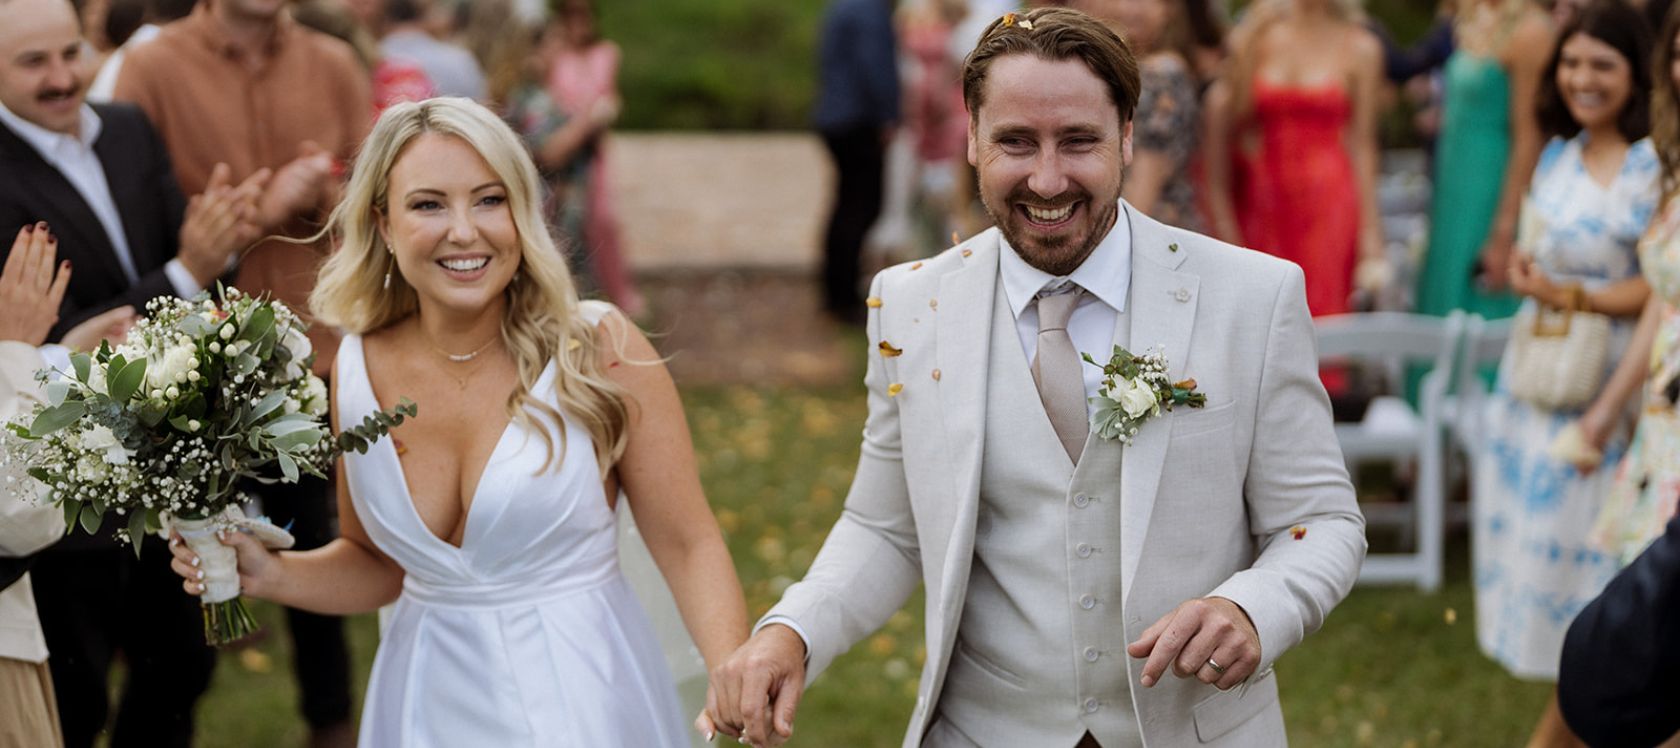 Bride with blonde hair wears a white wedding dress, hold hands with groom wearing taupe 3 piece suit